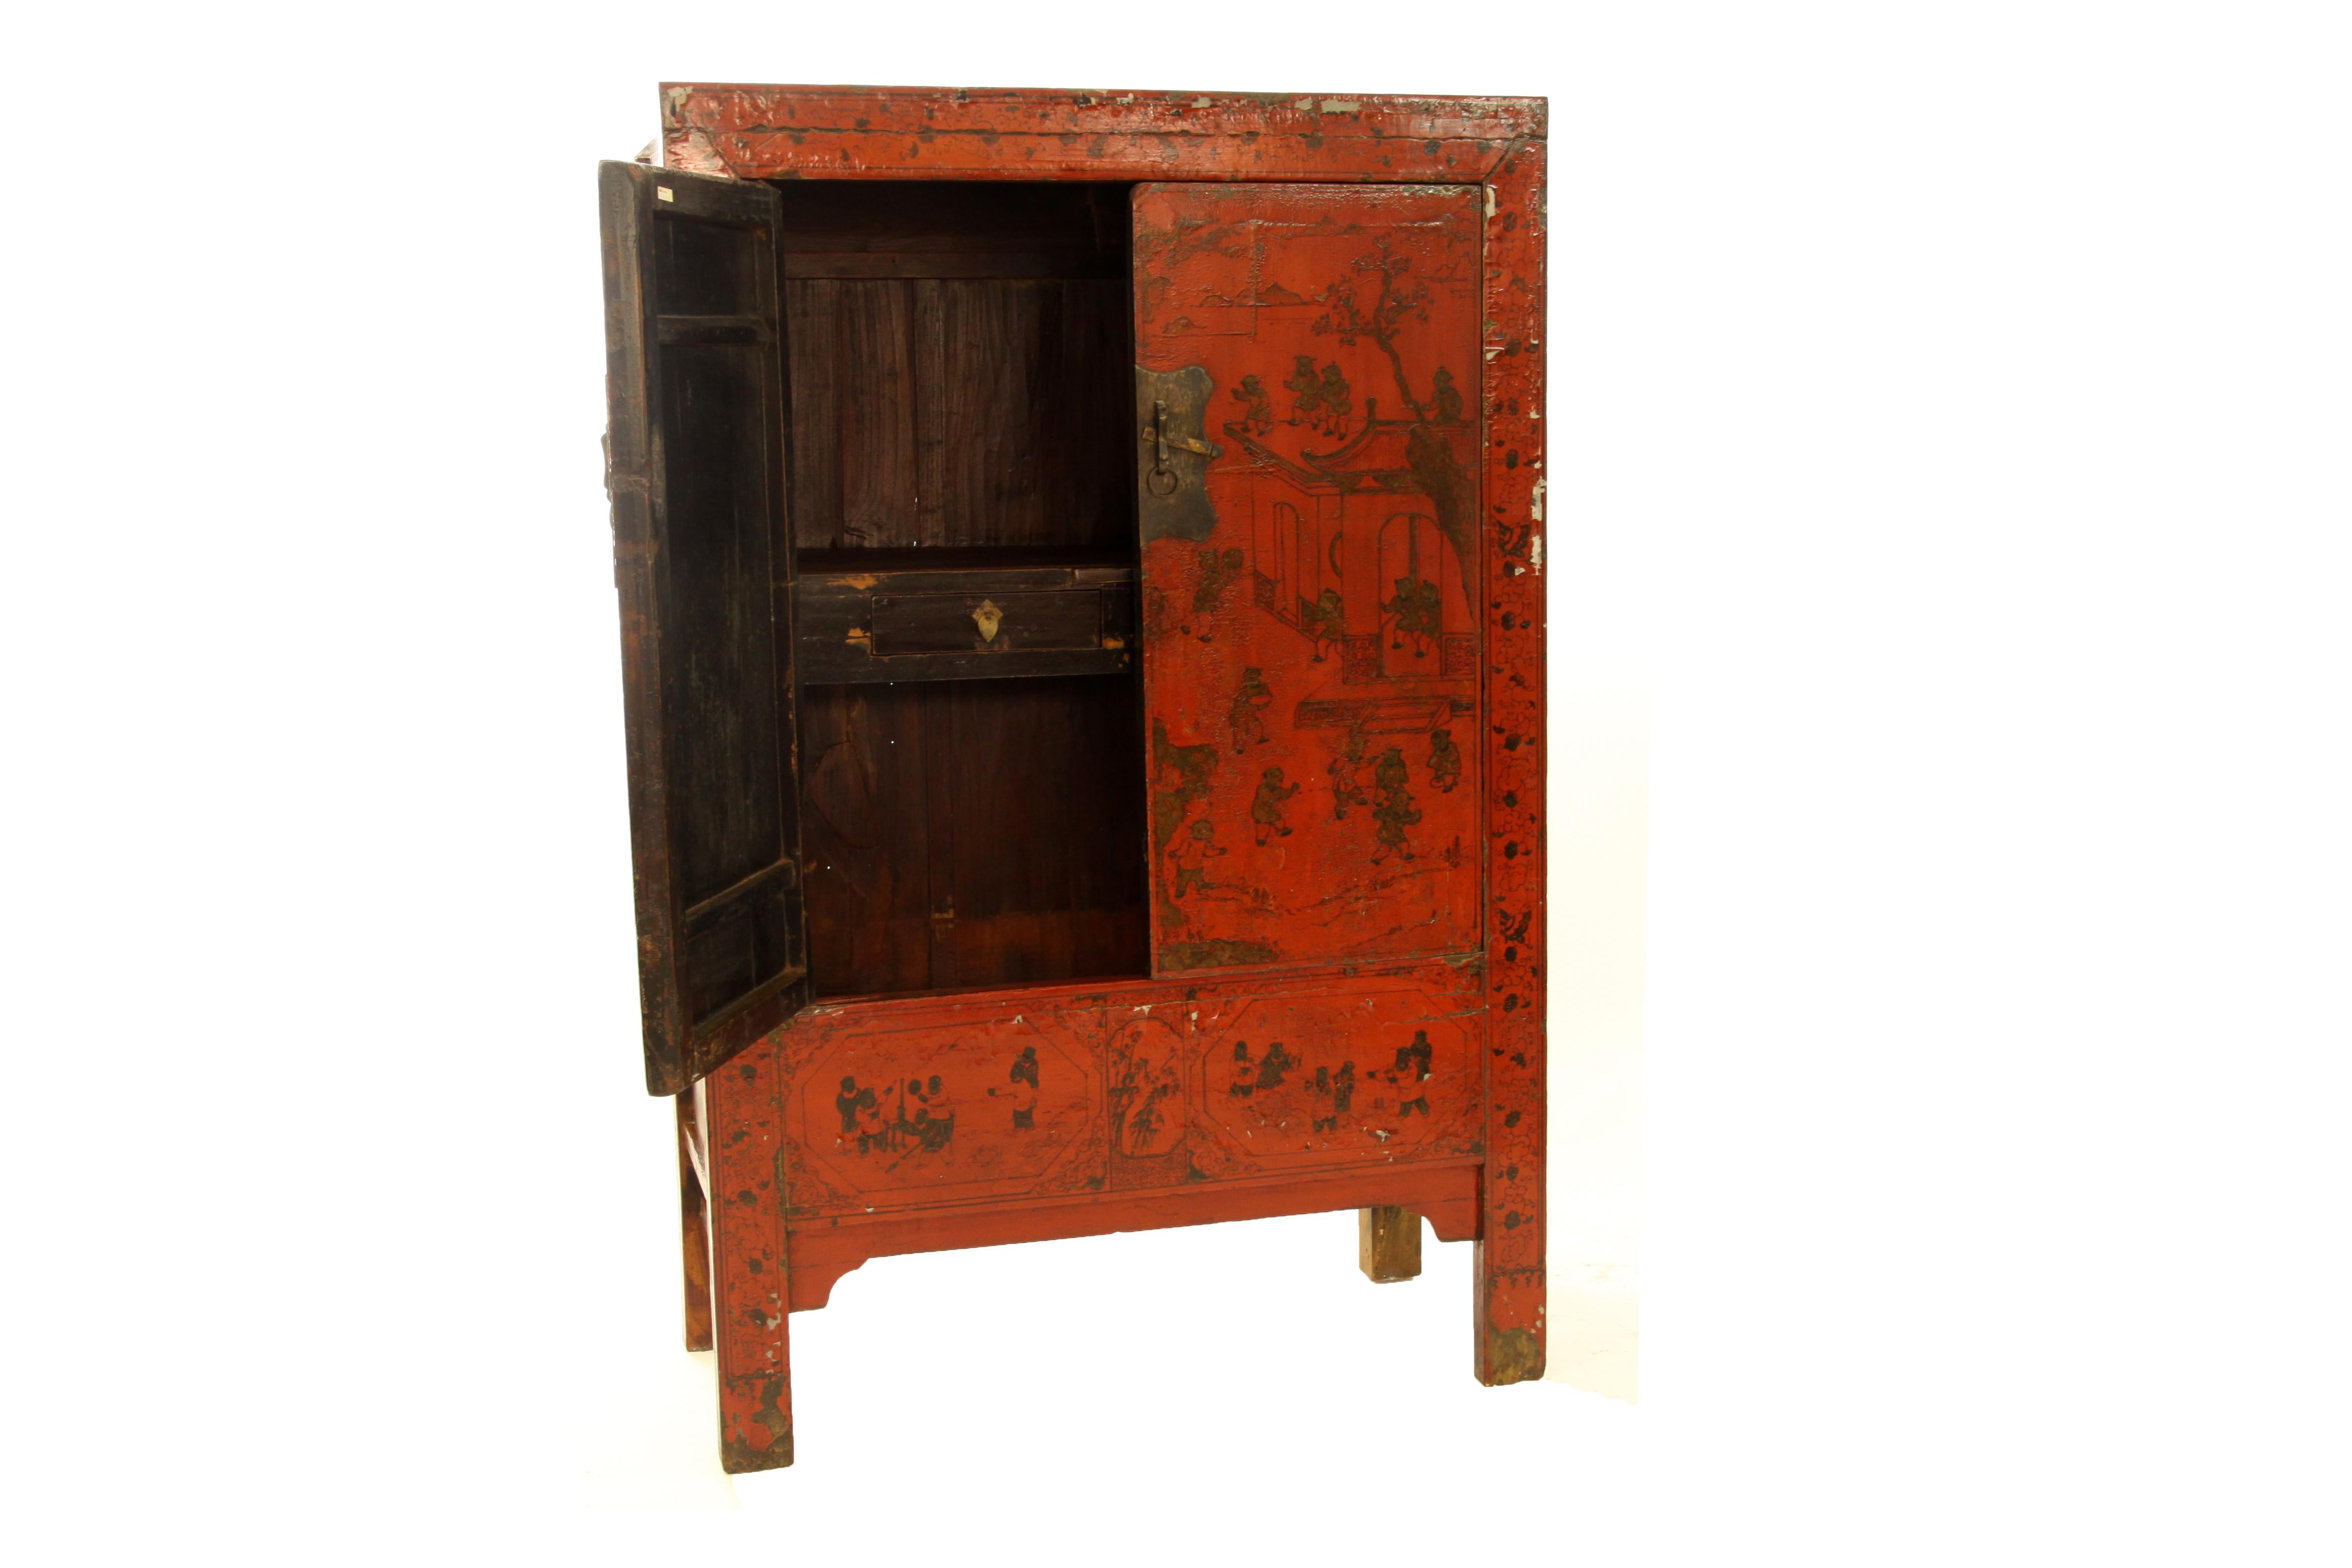 The fine gilt painted red lacquer cabinet with square top corners and rectangular-sectioned frames, a pair of paneled doors with gilt painting of children at play in the courtyard, opening to the interior with a mid-shelf forming the top of a row of